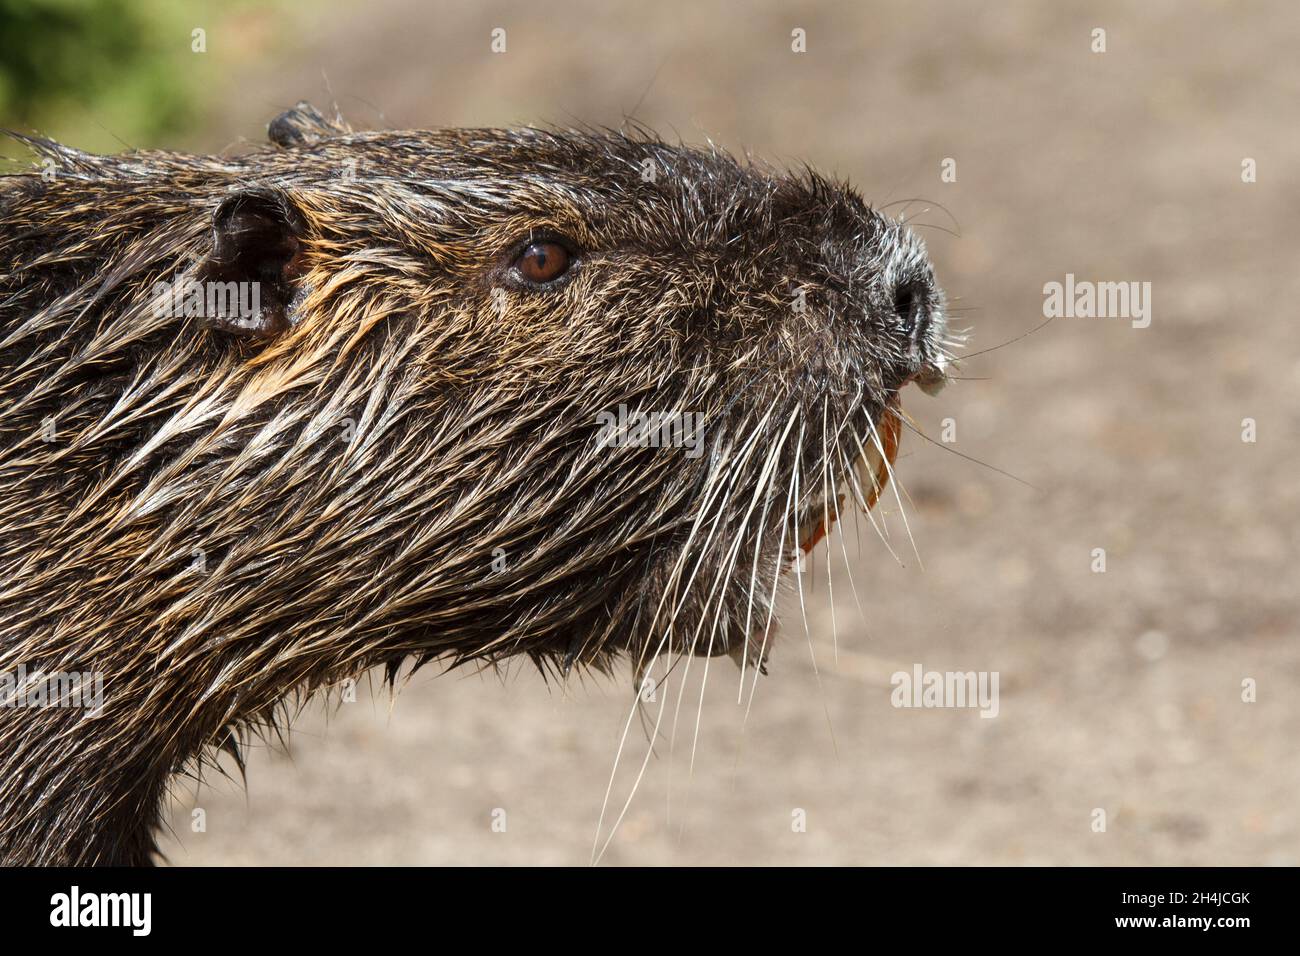 close up nutria portrait after bathing Stock Photo